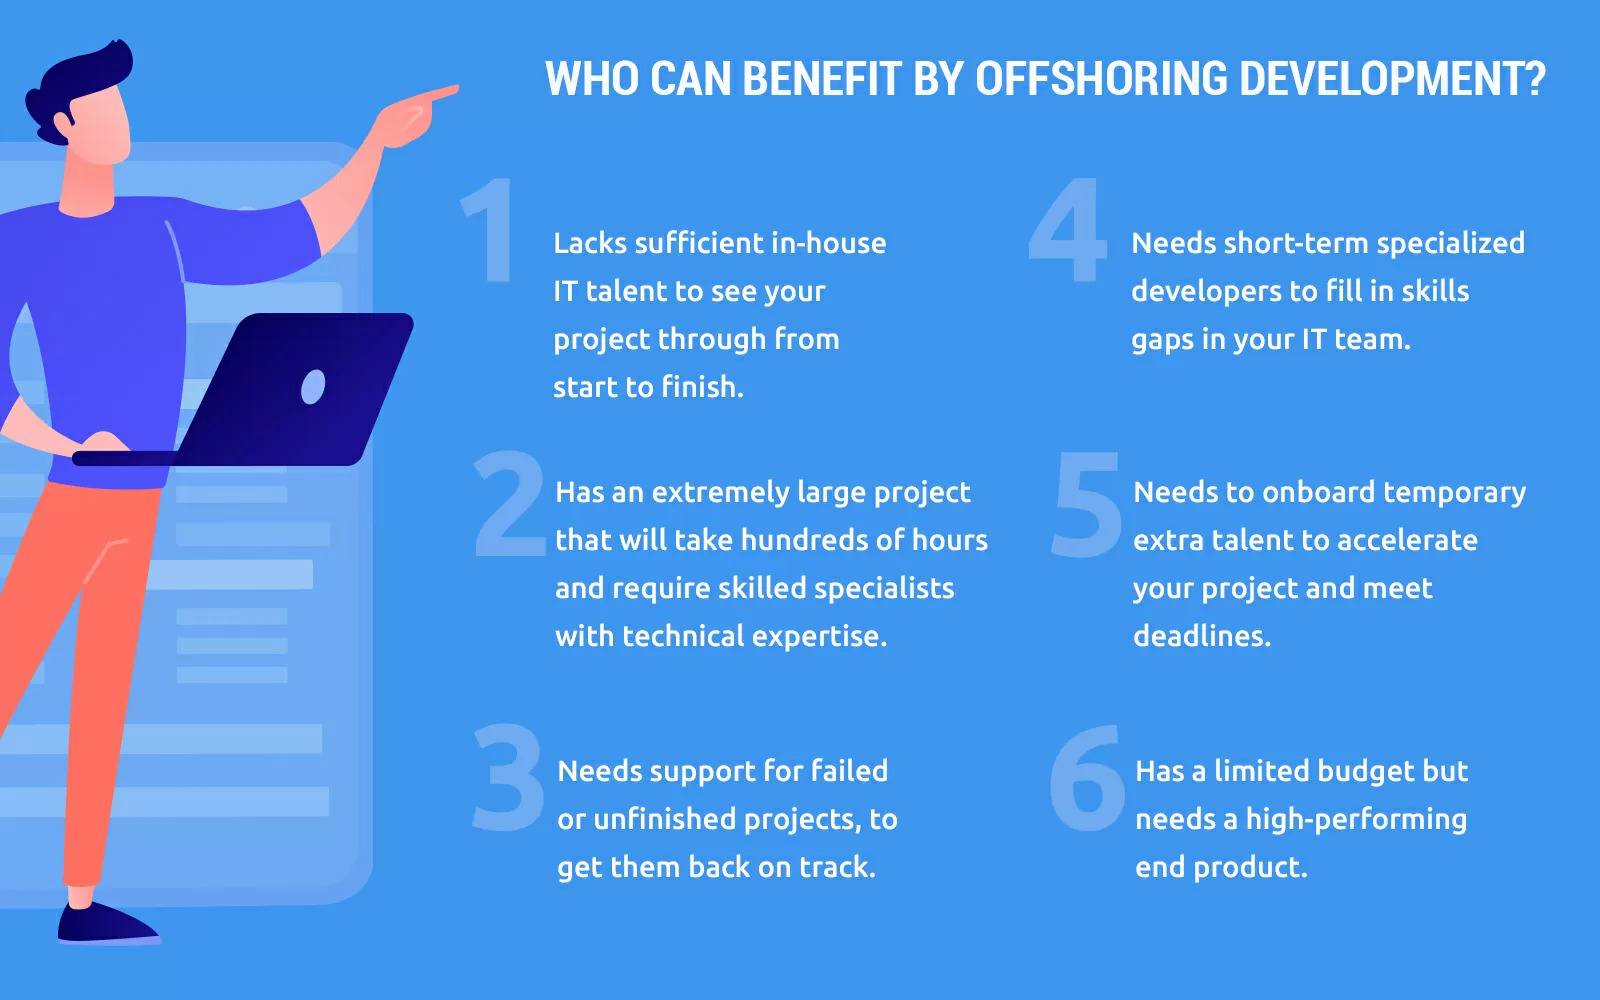 Who benefits from offshoring development?